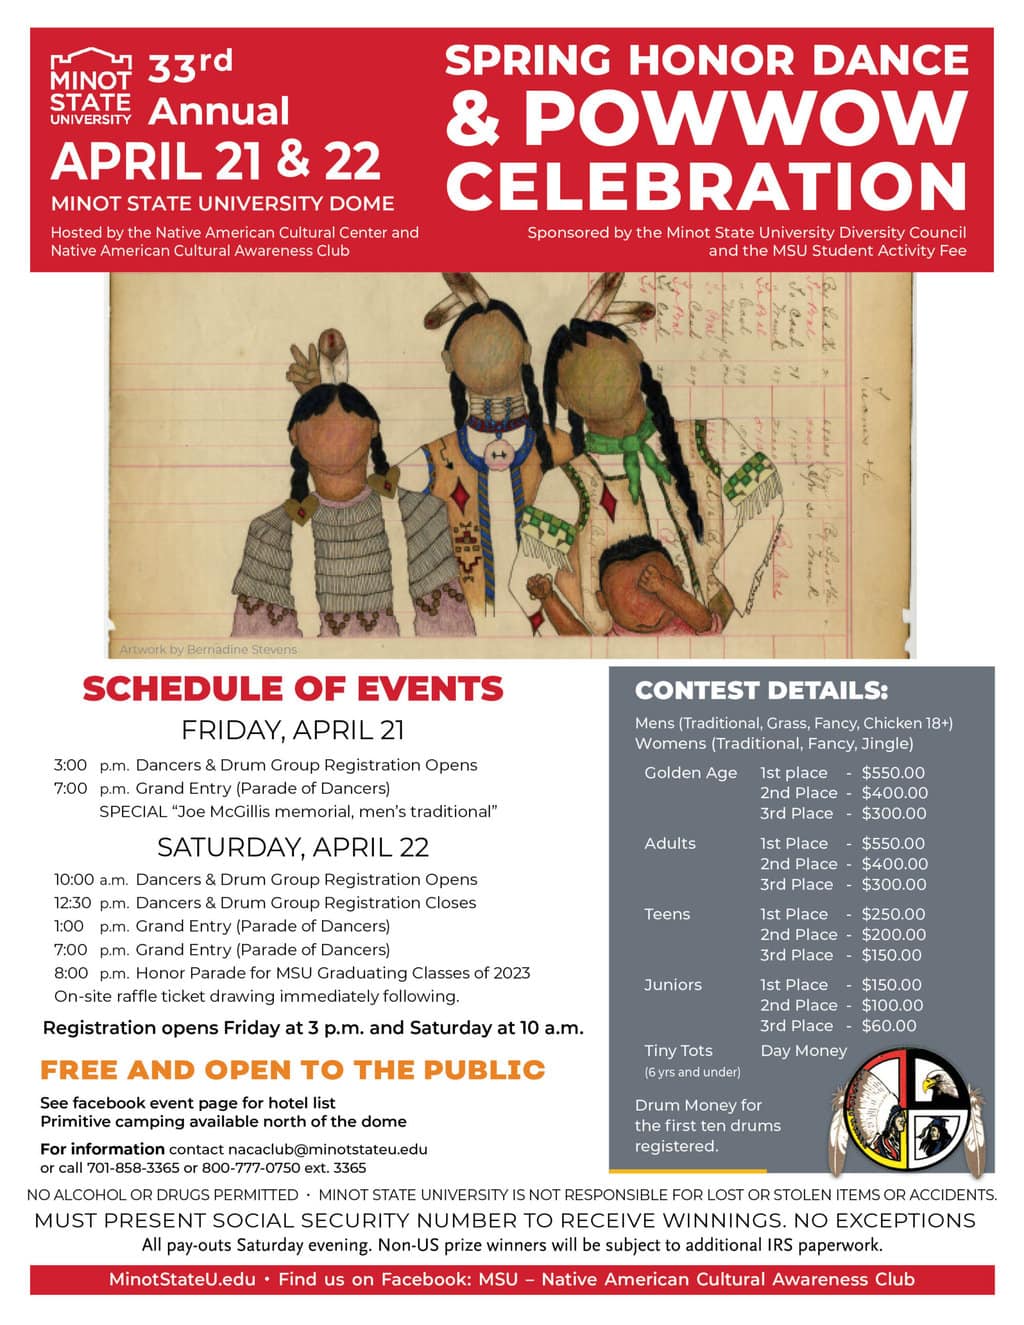 33rd Minot State University Annual Spring Honor Dance & Pow Wow Celebration 2023